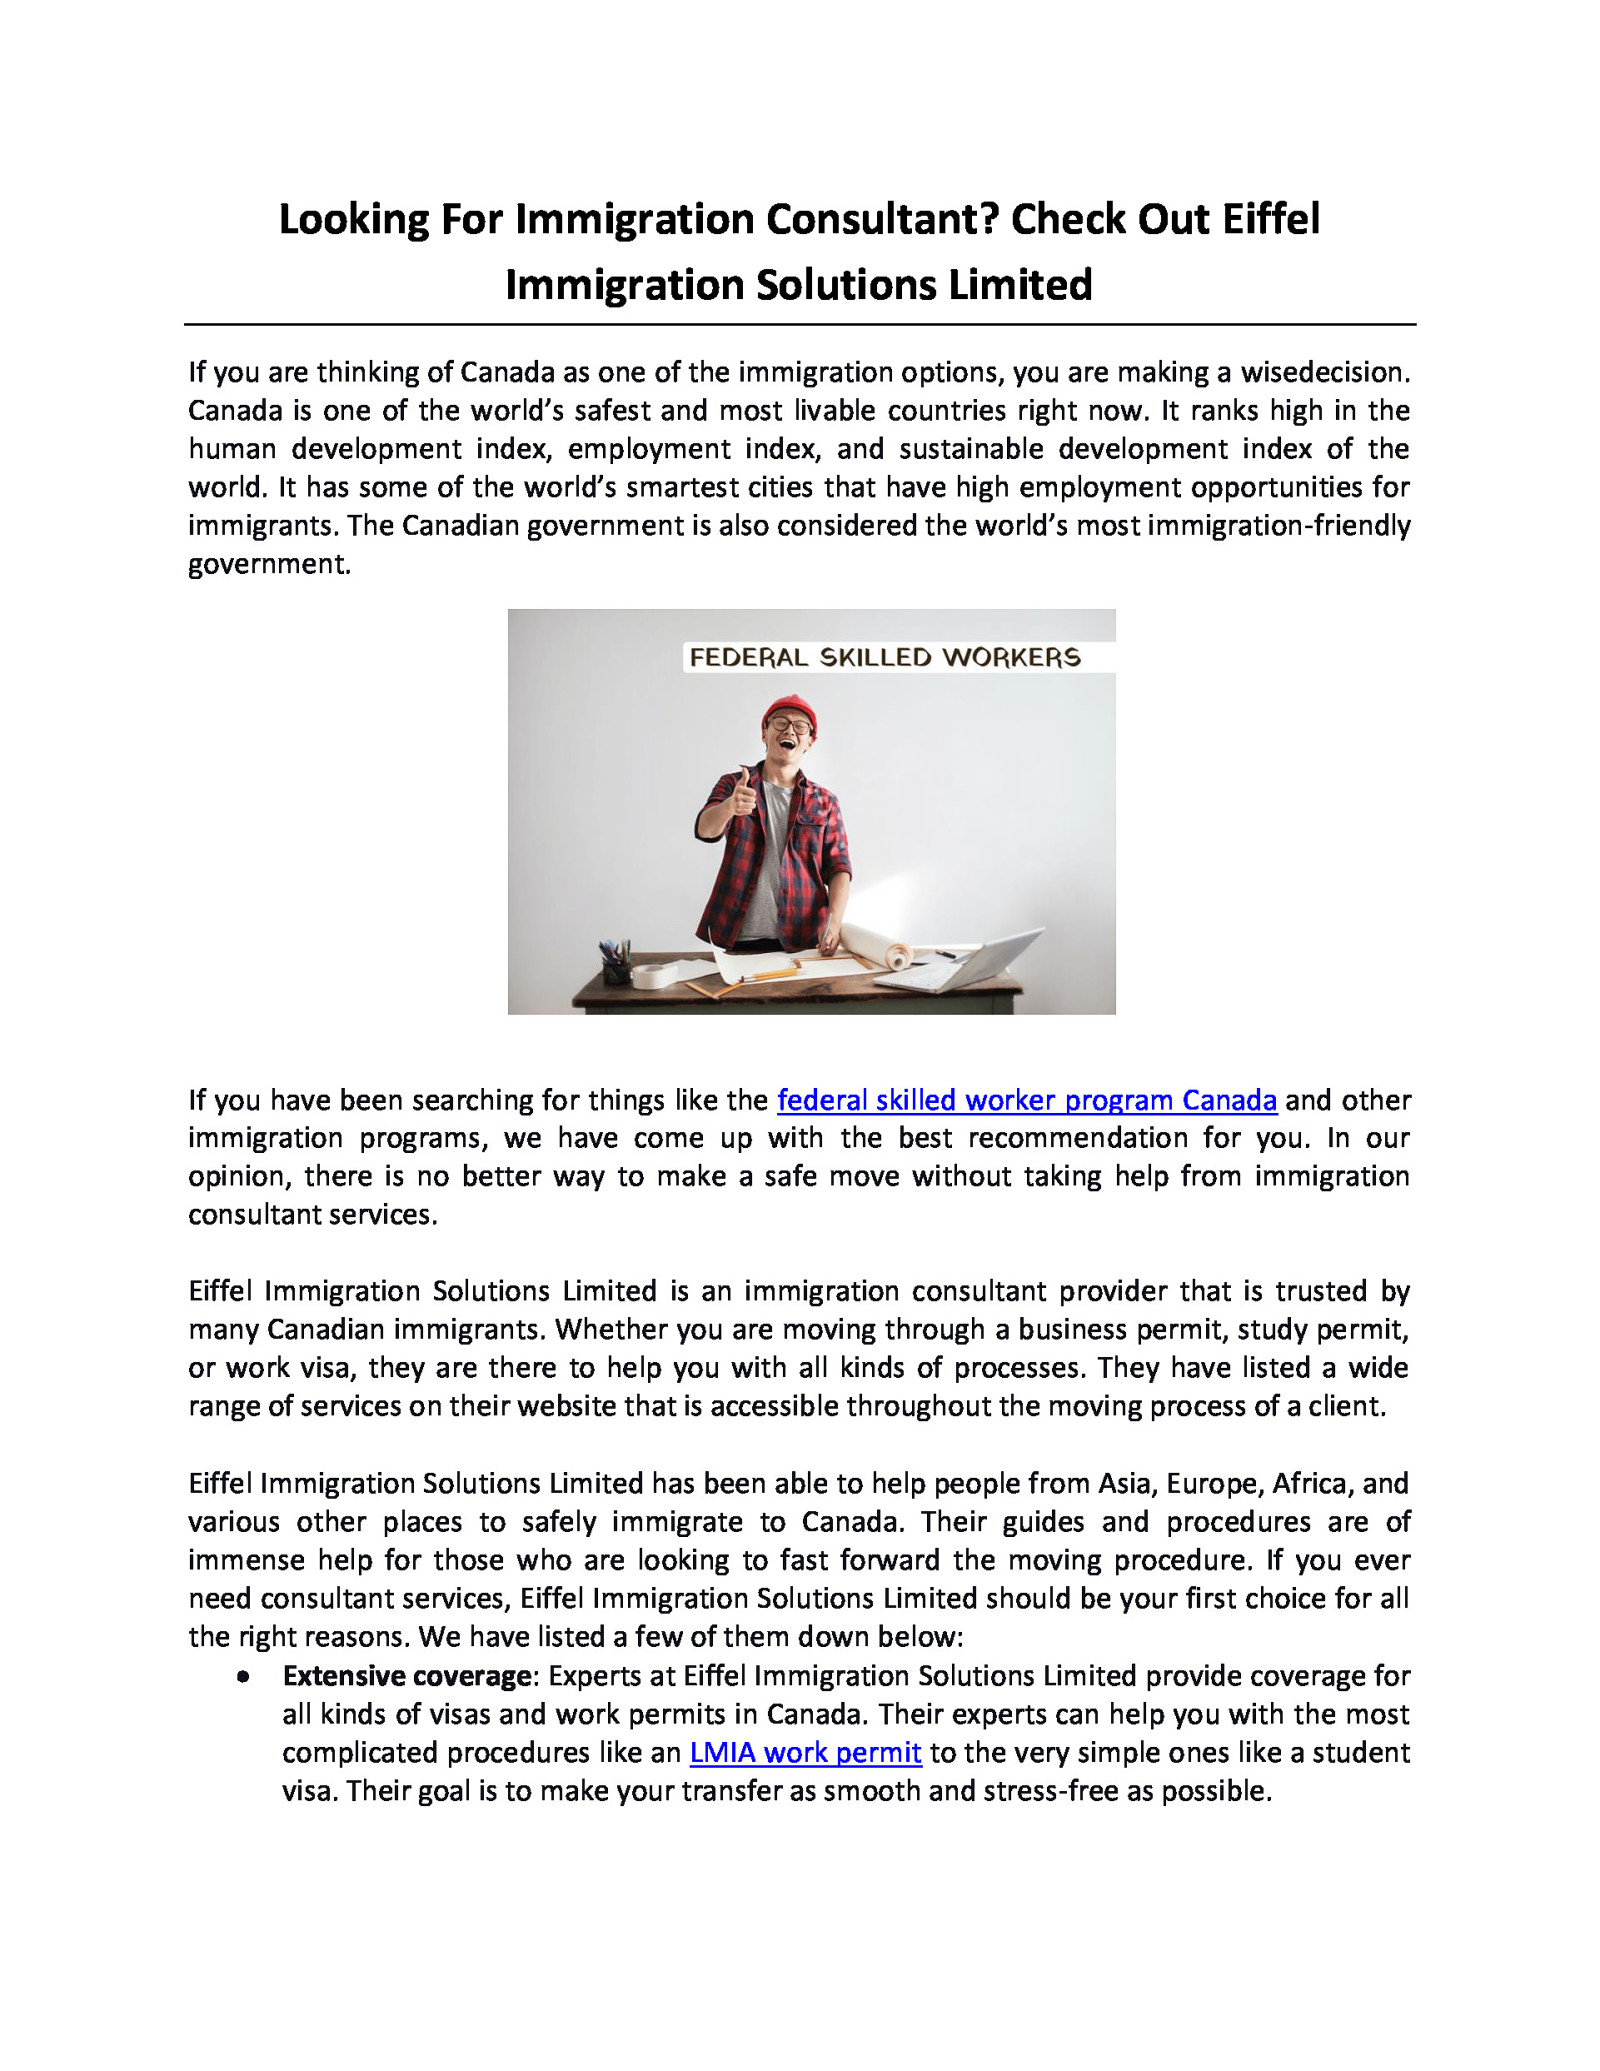 Looking For Immigration Consultant? Check Out Eiffel Immigration Solutions Limited